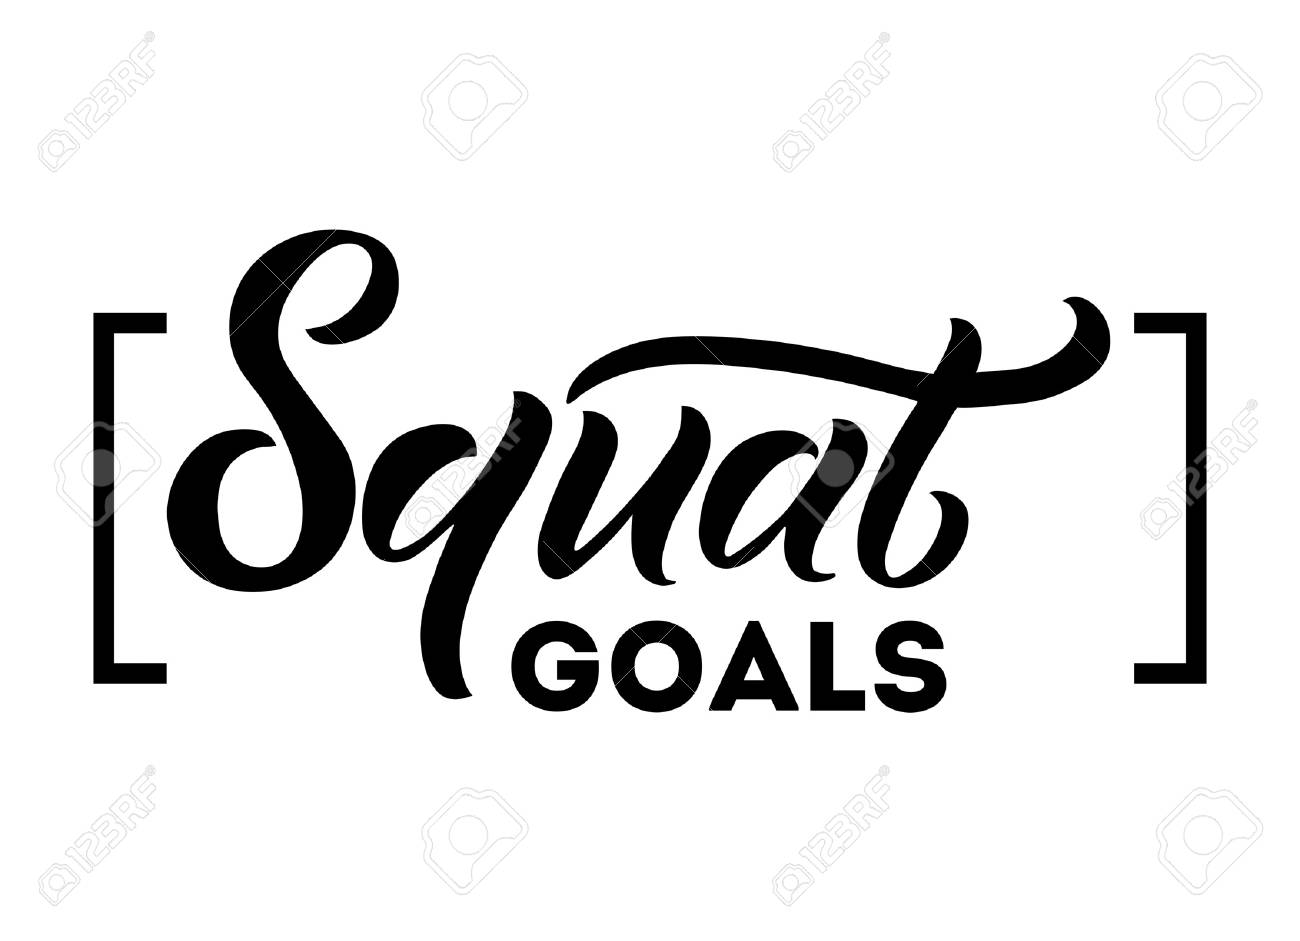 Squat Goals Motivational Quote Isolated On White Background